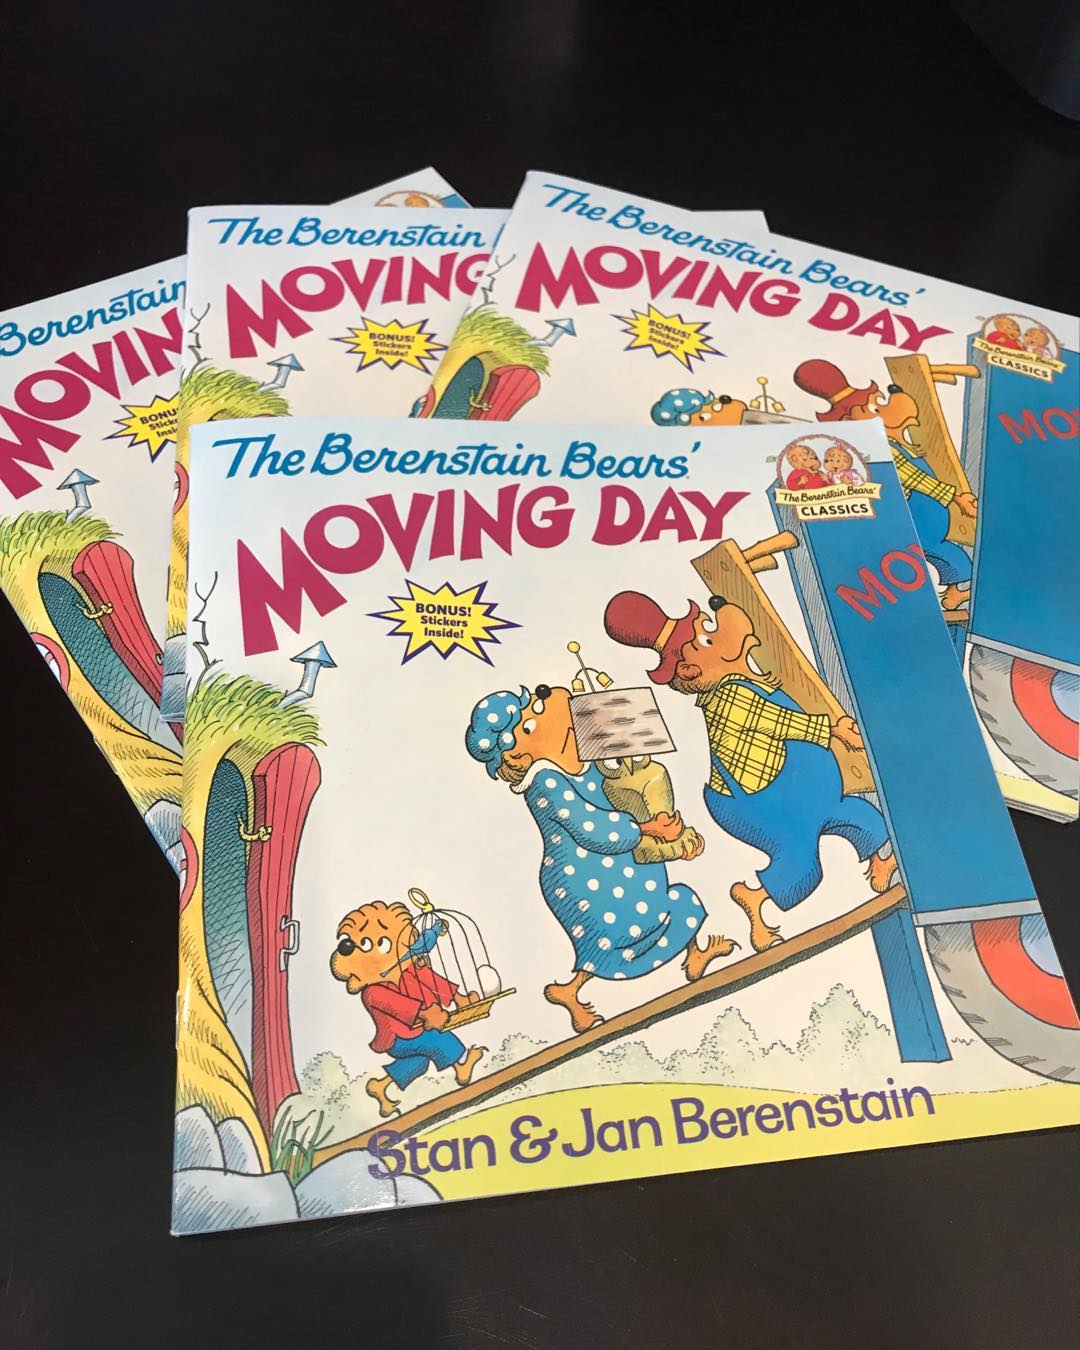 Copies of the Berenstain Bears Moving Day book. Photo by Instagram user @sarah.tiltlane